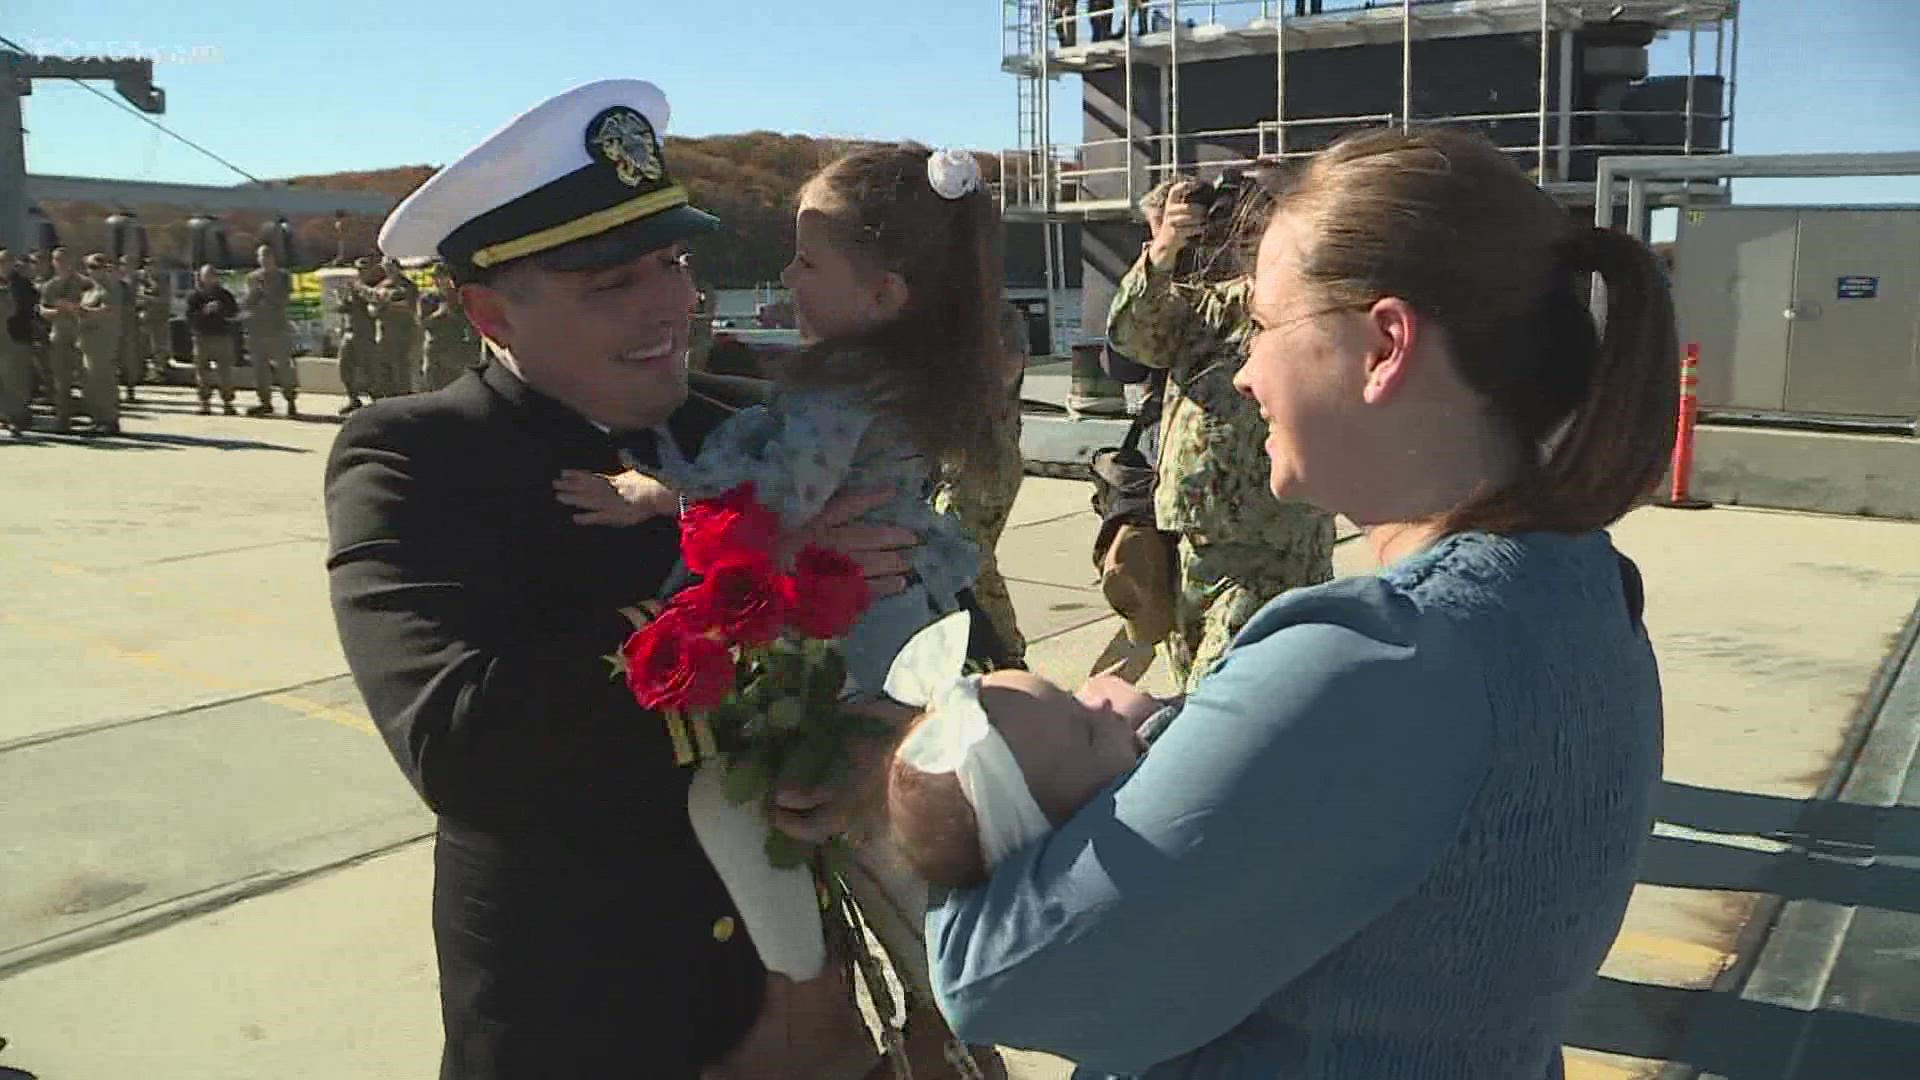 After being deployed for 7 months, the USS North Dakota returned home to Naval Submarine Base New London Thursday, where the crew was reunited with their families.